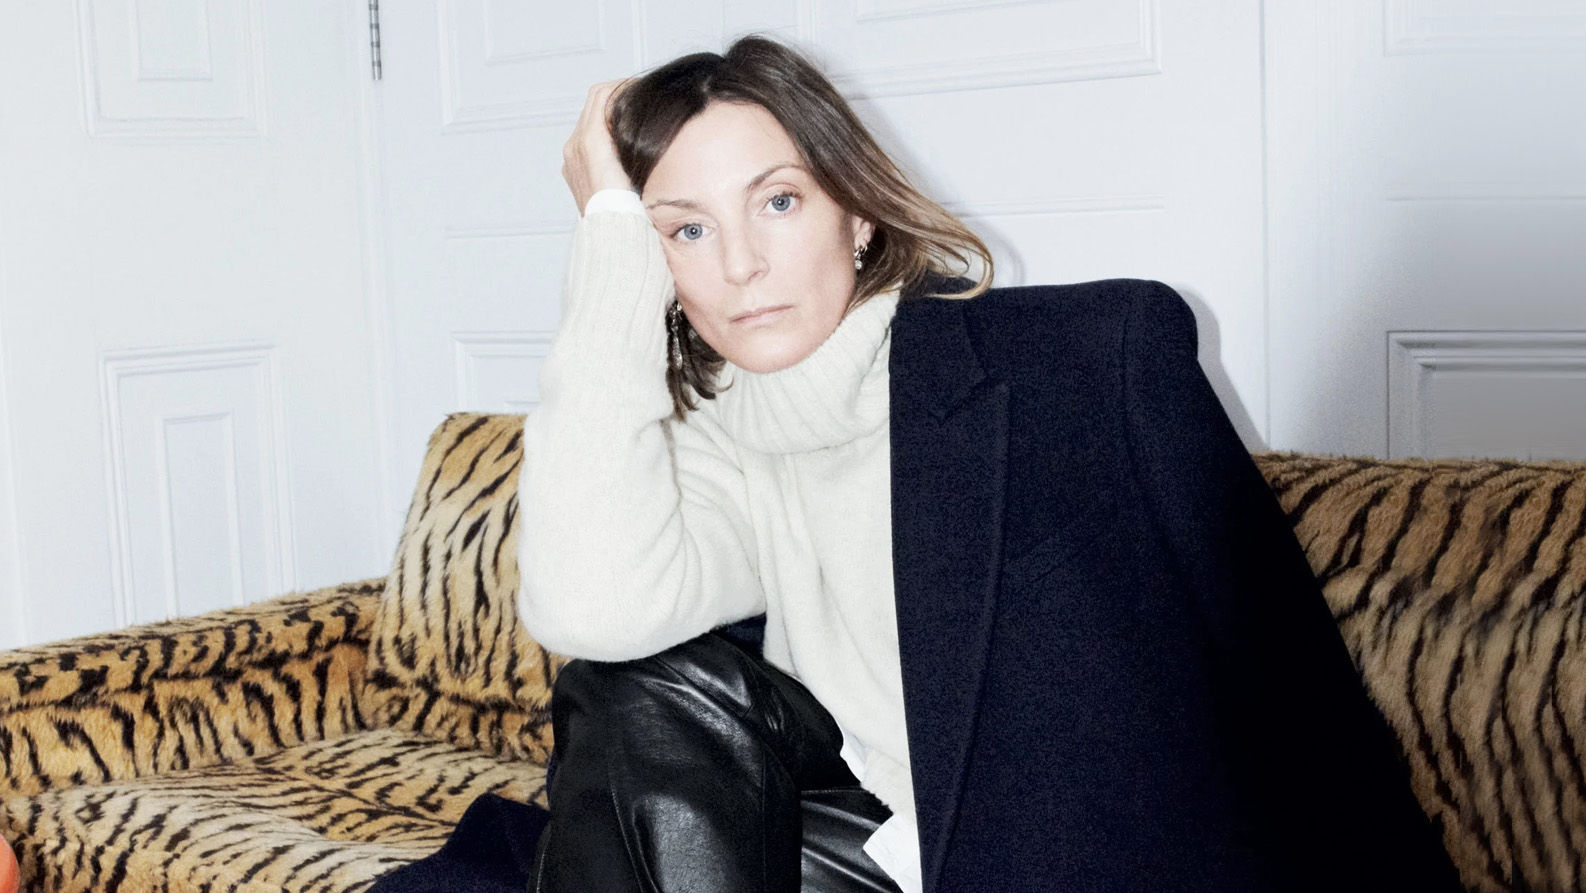 Looking to cop some new Phoebe Philo? Here's everything we know